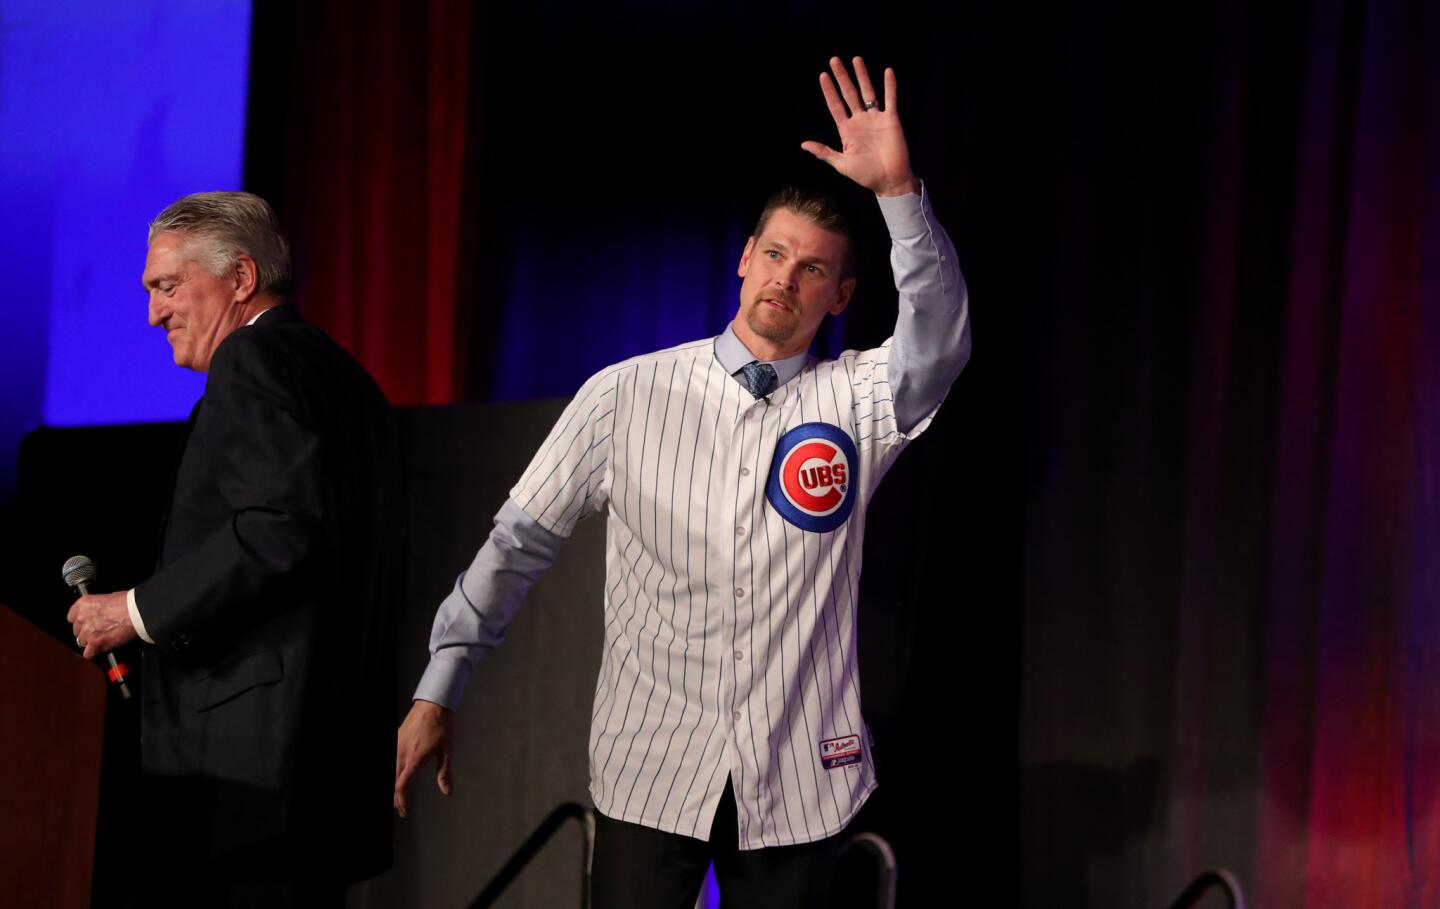 Kerry Wood waves to the crowd as former and current members of the organization are introduced to fans on the first day of the annual Cubs Convention on Jan. 12, 2018.